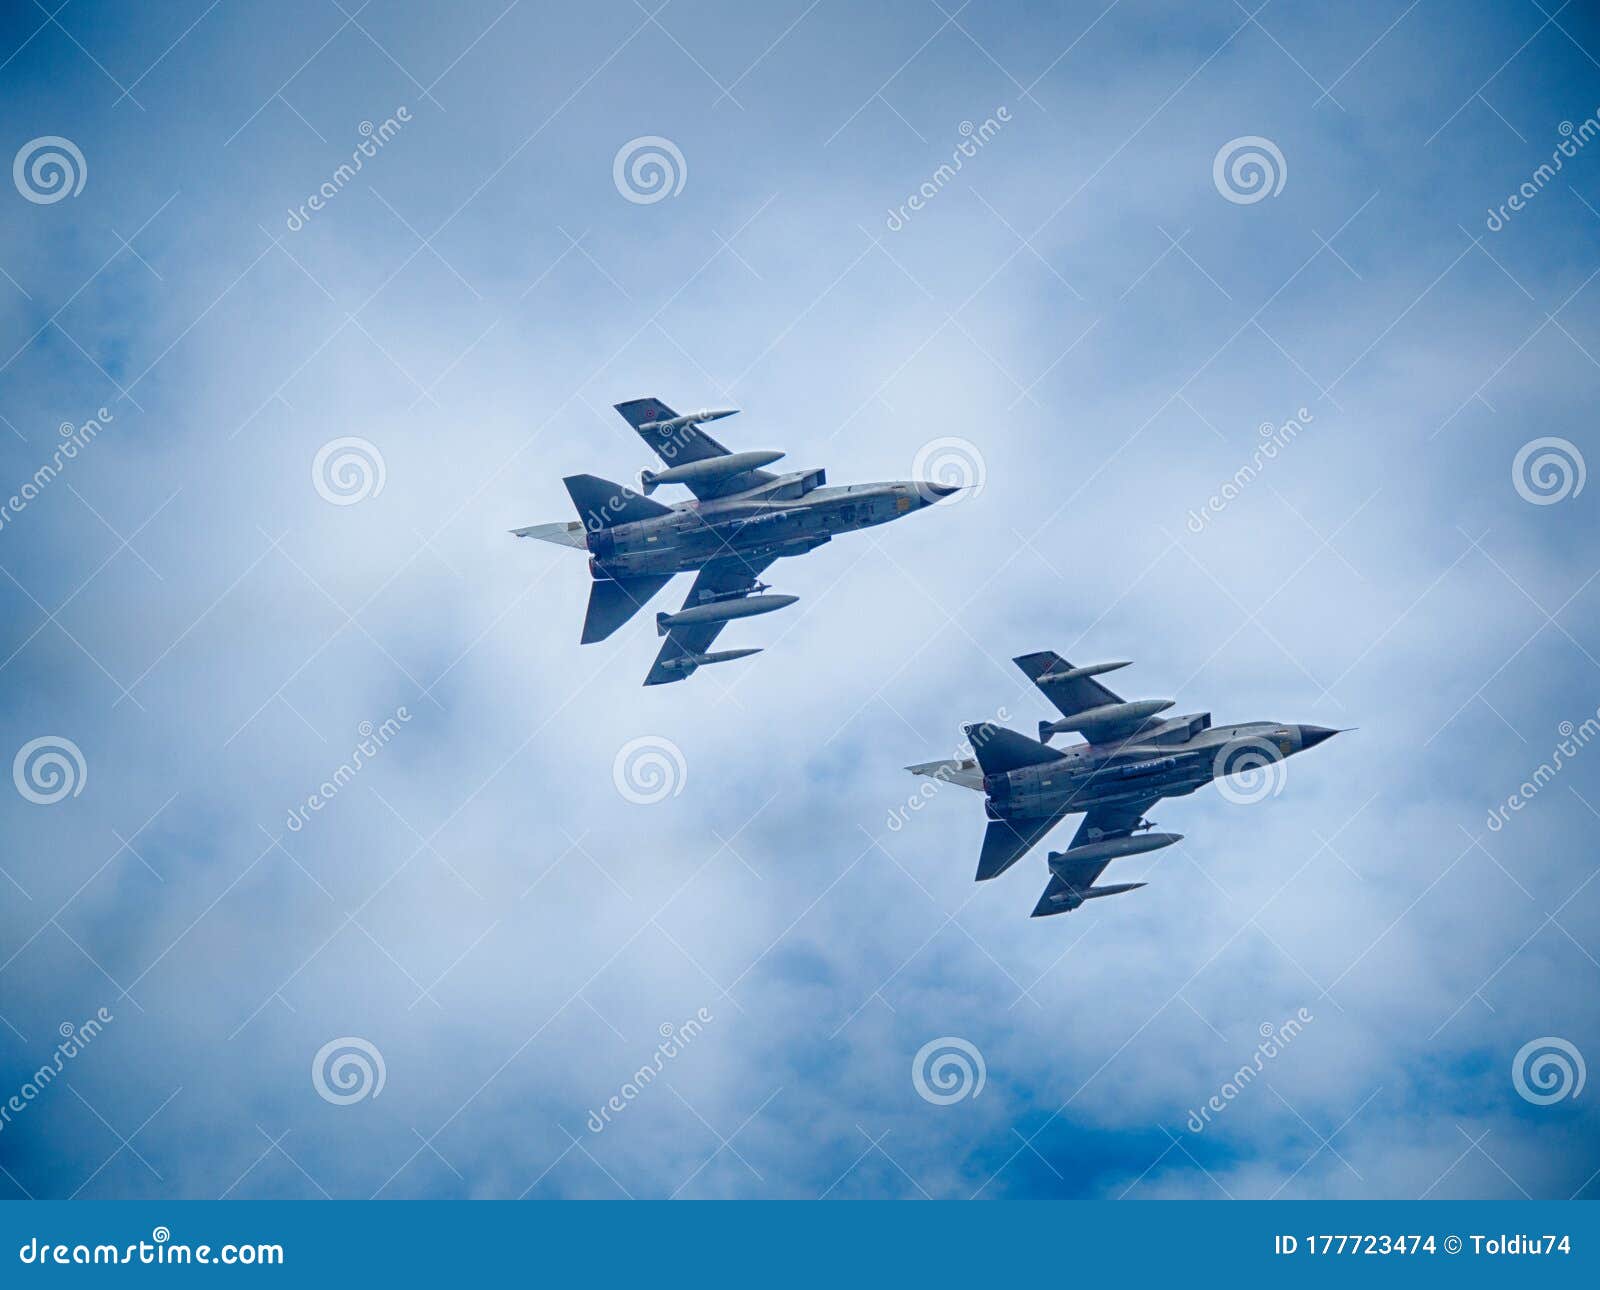 Fighter Planes Speeding through the Sky Armed with Bombs during a ...